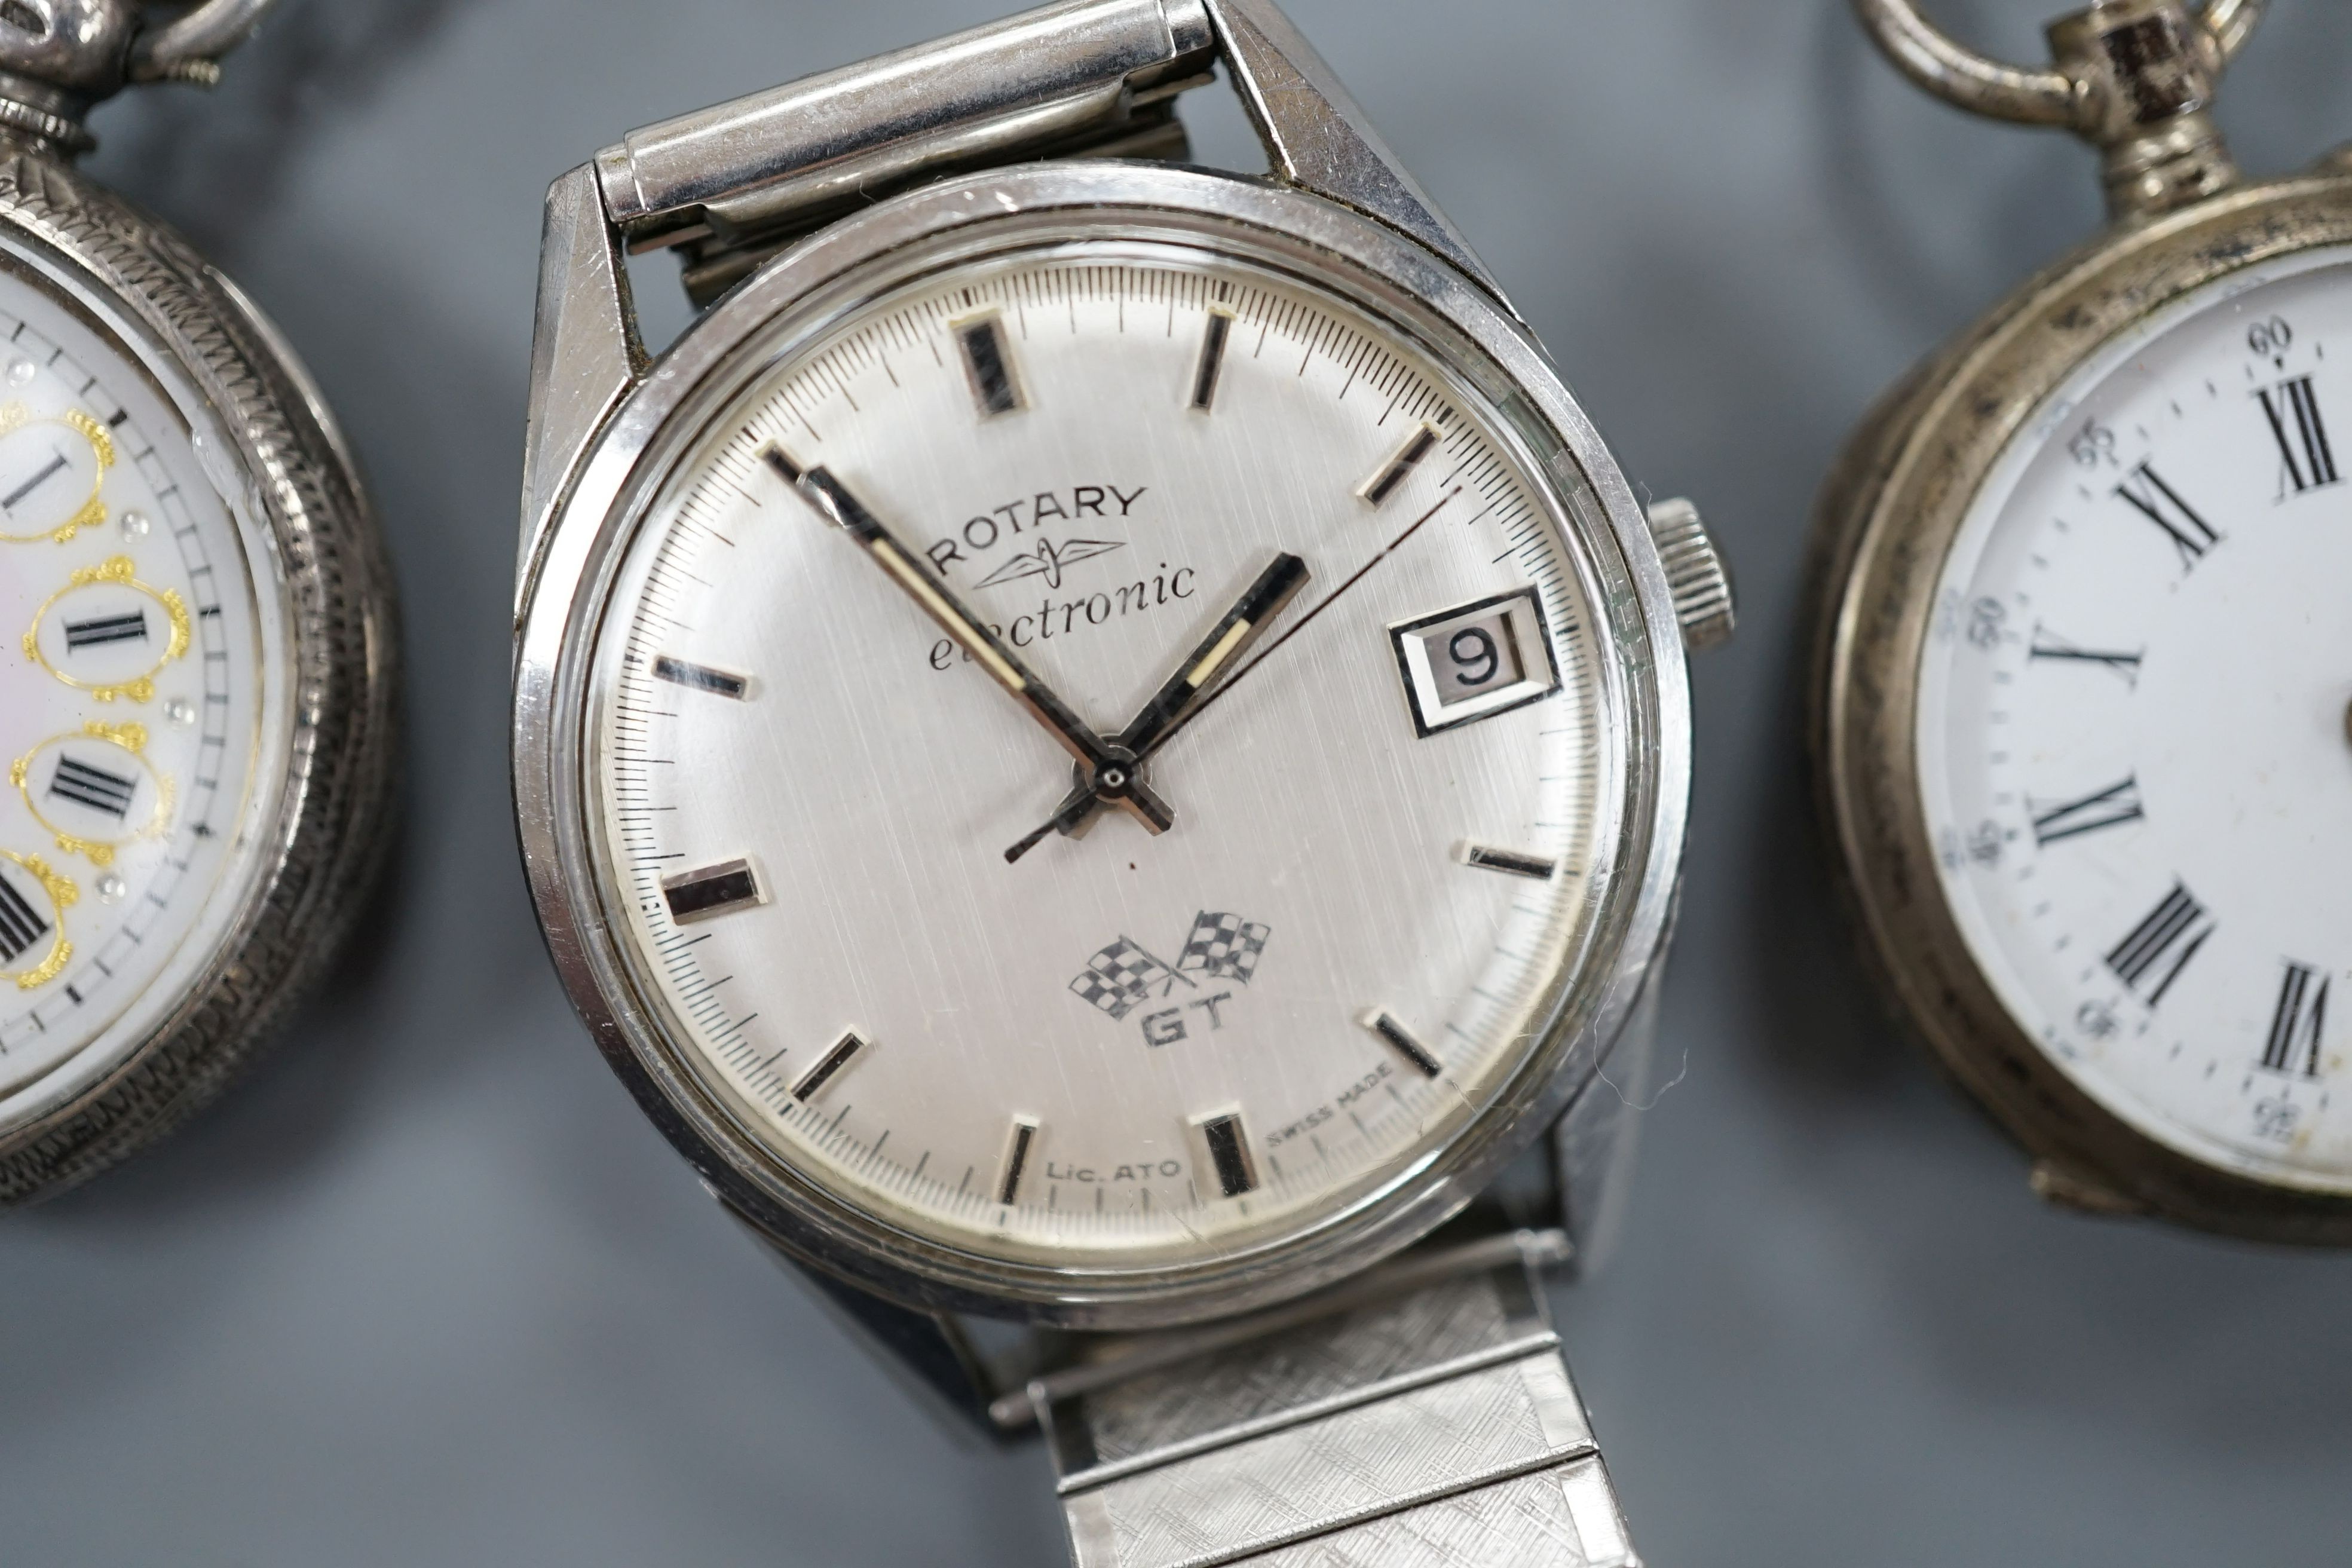 A gentleman's steel Rotary Electronic GT wrist watch and two Swiss white metal fob watches